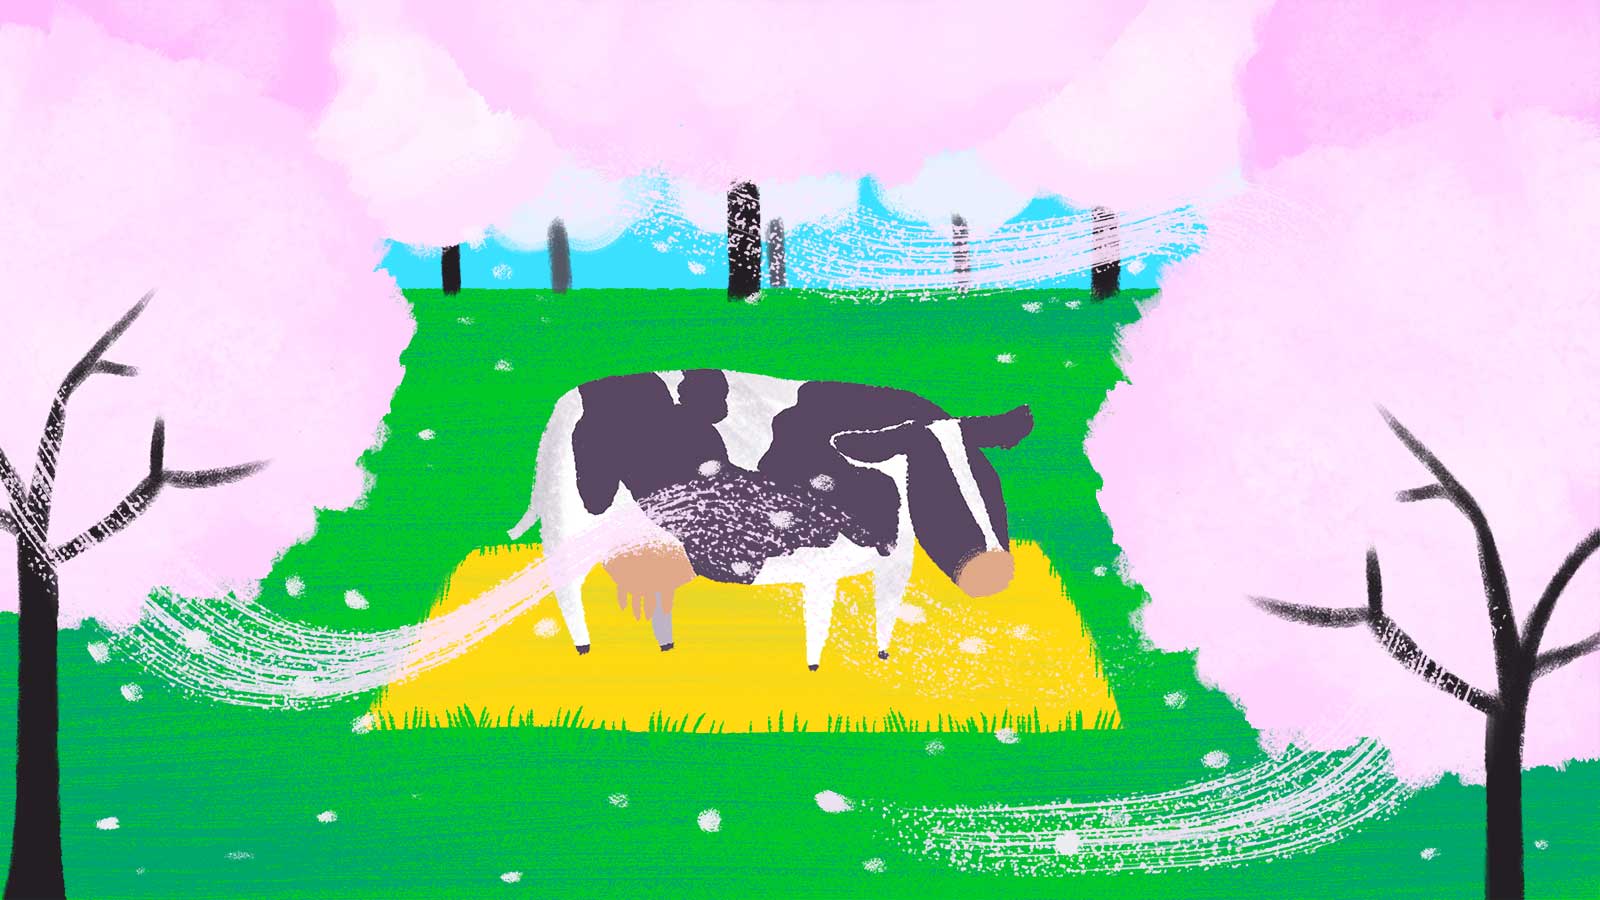 Almond orchard with lone cow